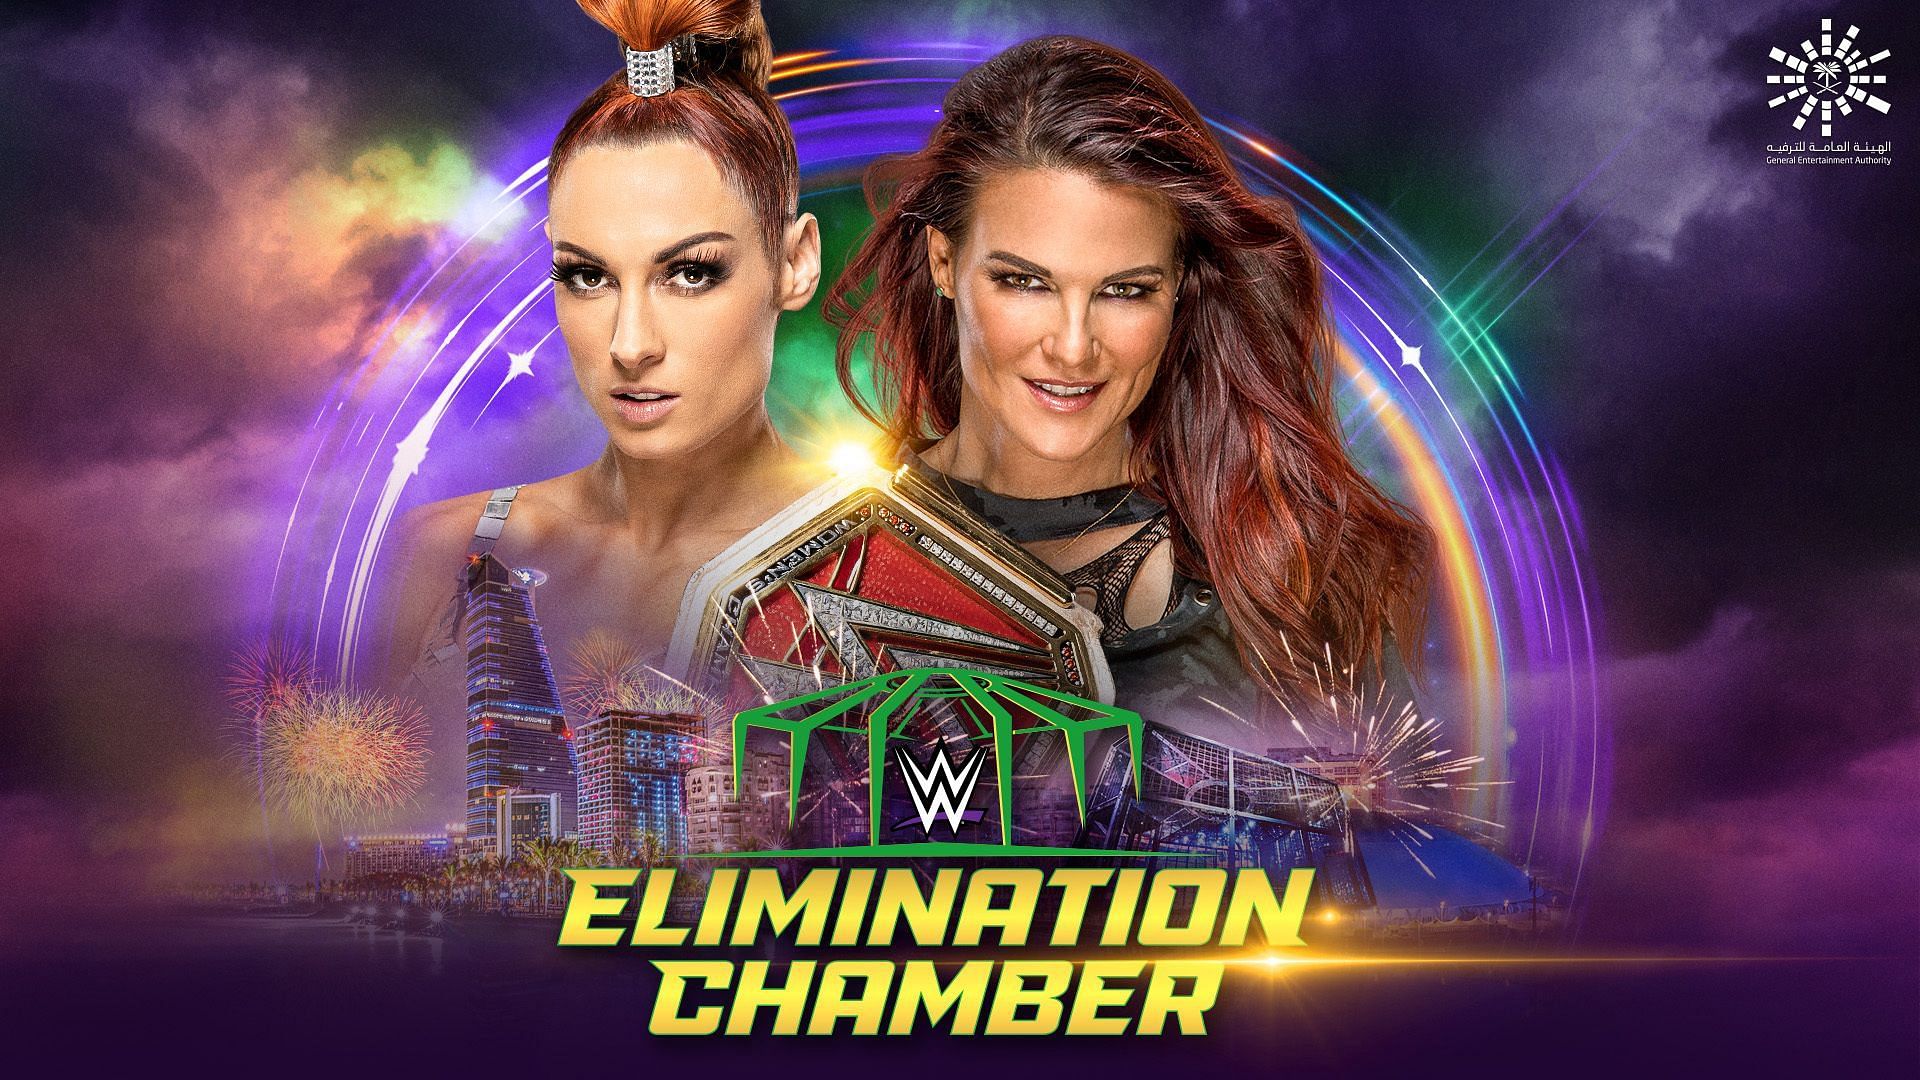 There are three women&#039;s matches scheduled for Saturday&#039;s Elimination Chamber event.